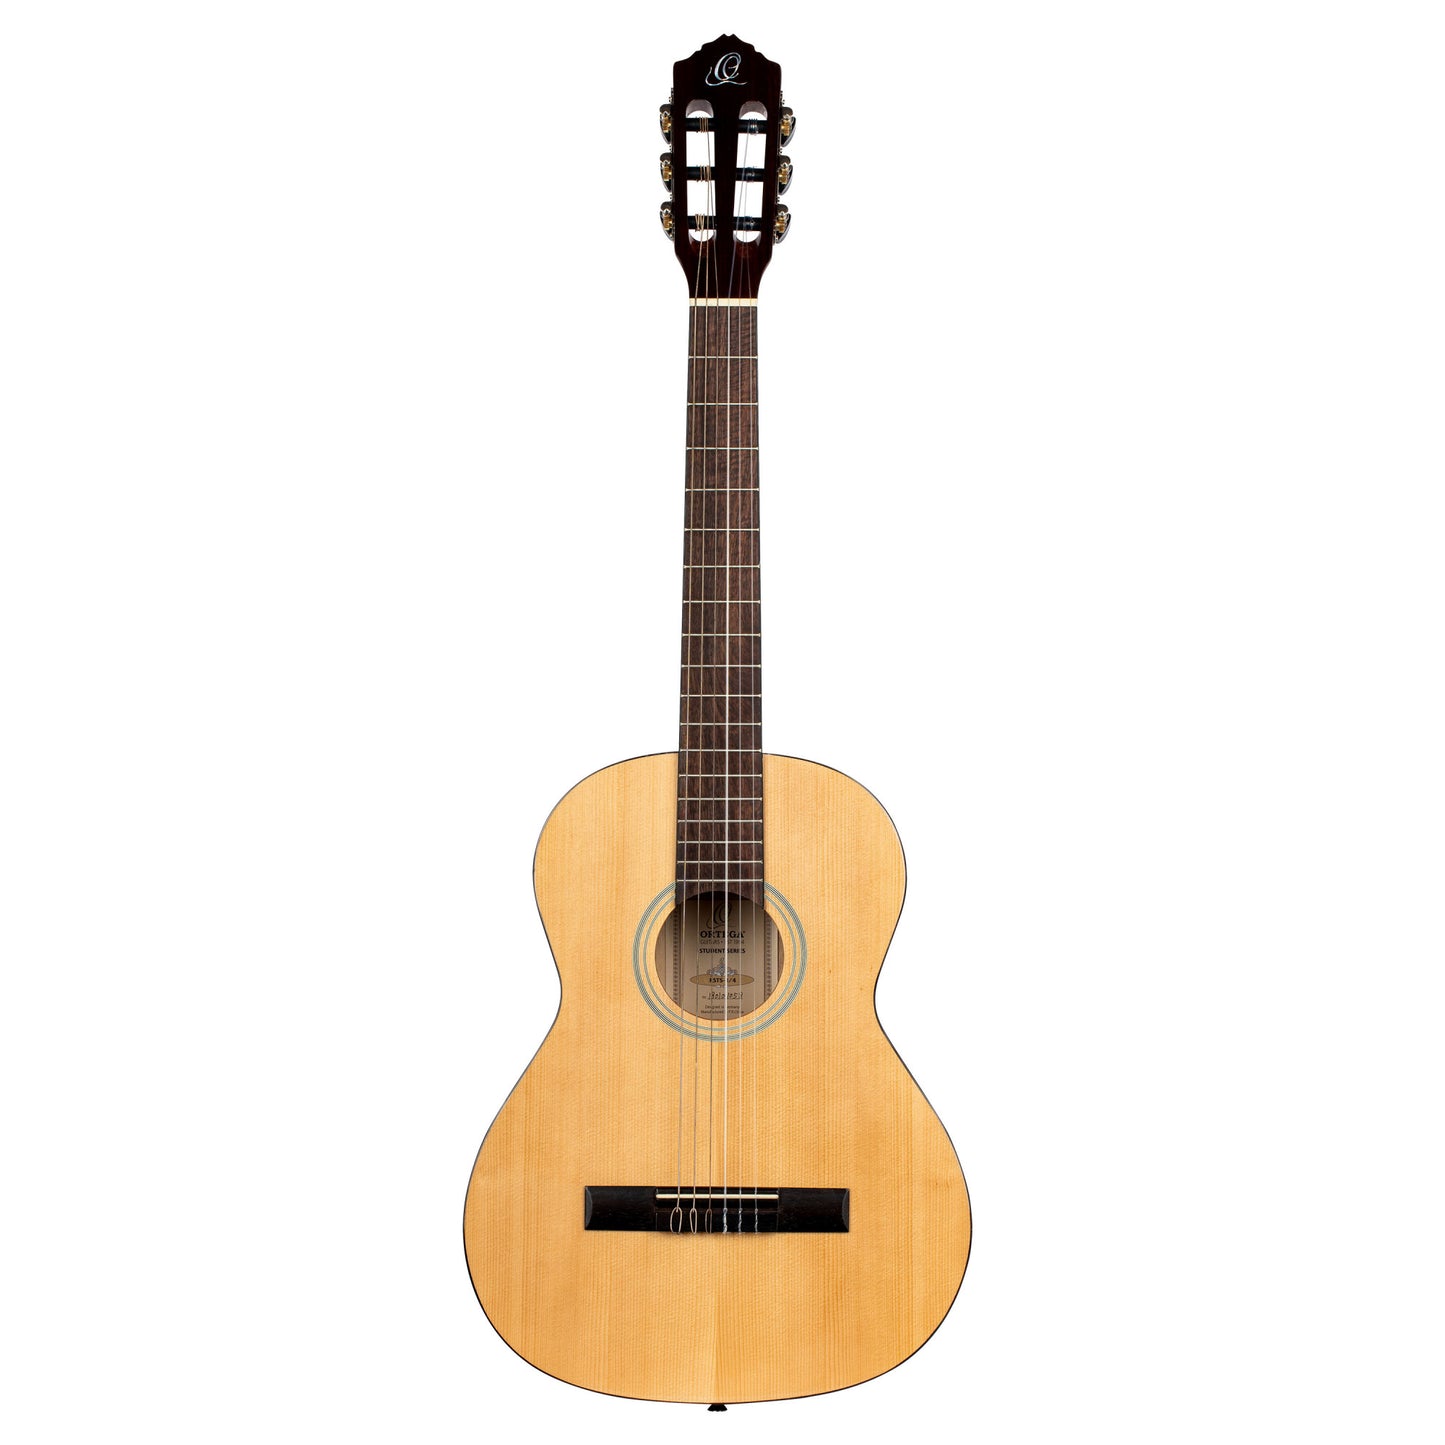 Ortega Student Series RST5-3/4 - Spruce Top Classical Guitar - 3/4 Size